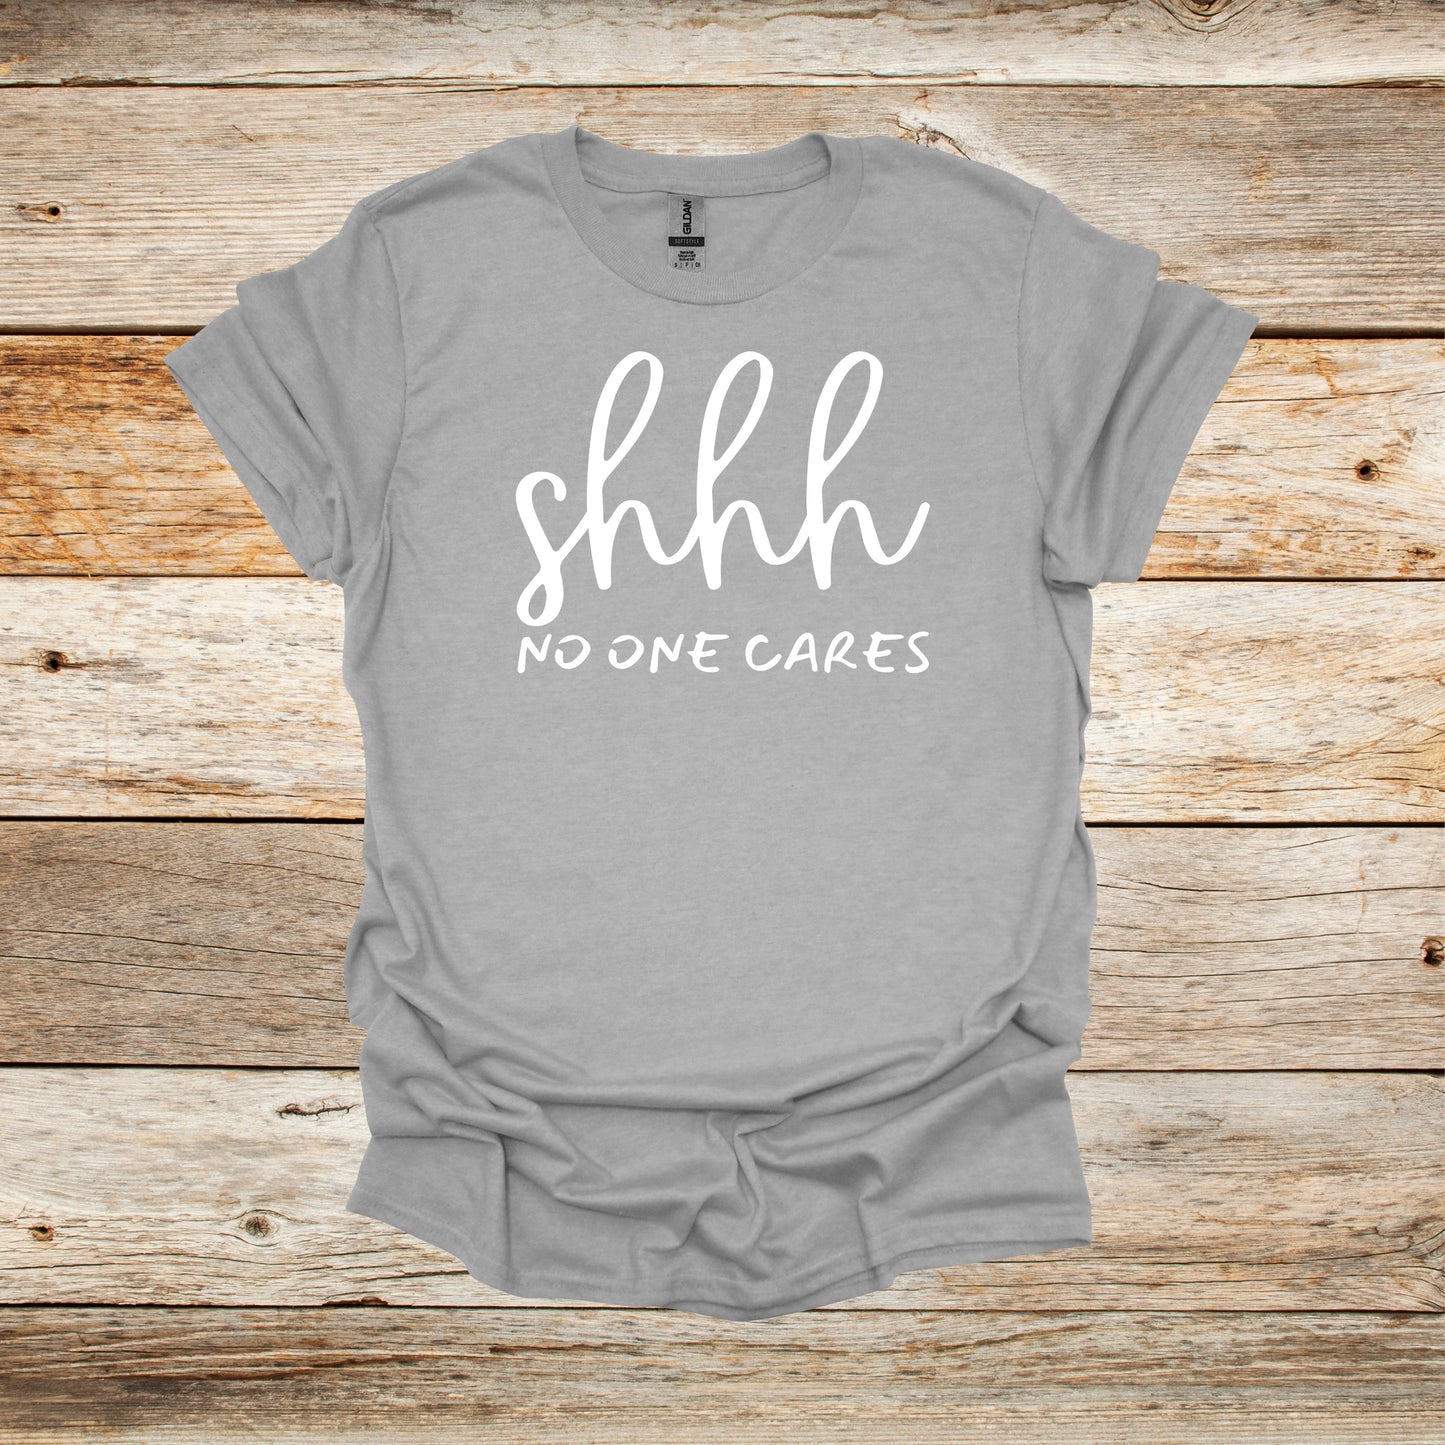 Sayings T-Shirt -Shhh No One Cares - Men's and Women's Tee Shirts - Sayings T-Shirts Graphic Avenue Sport Grey Adult Small 